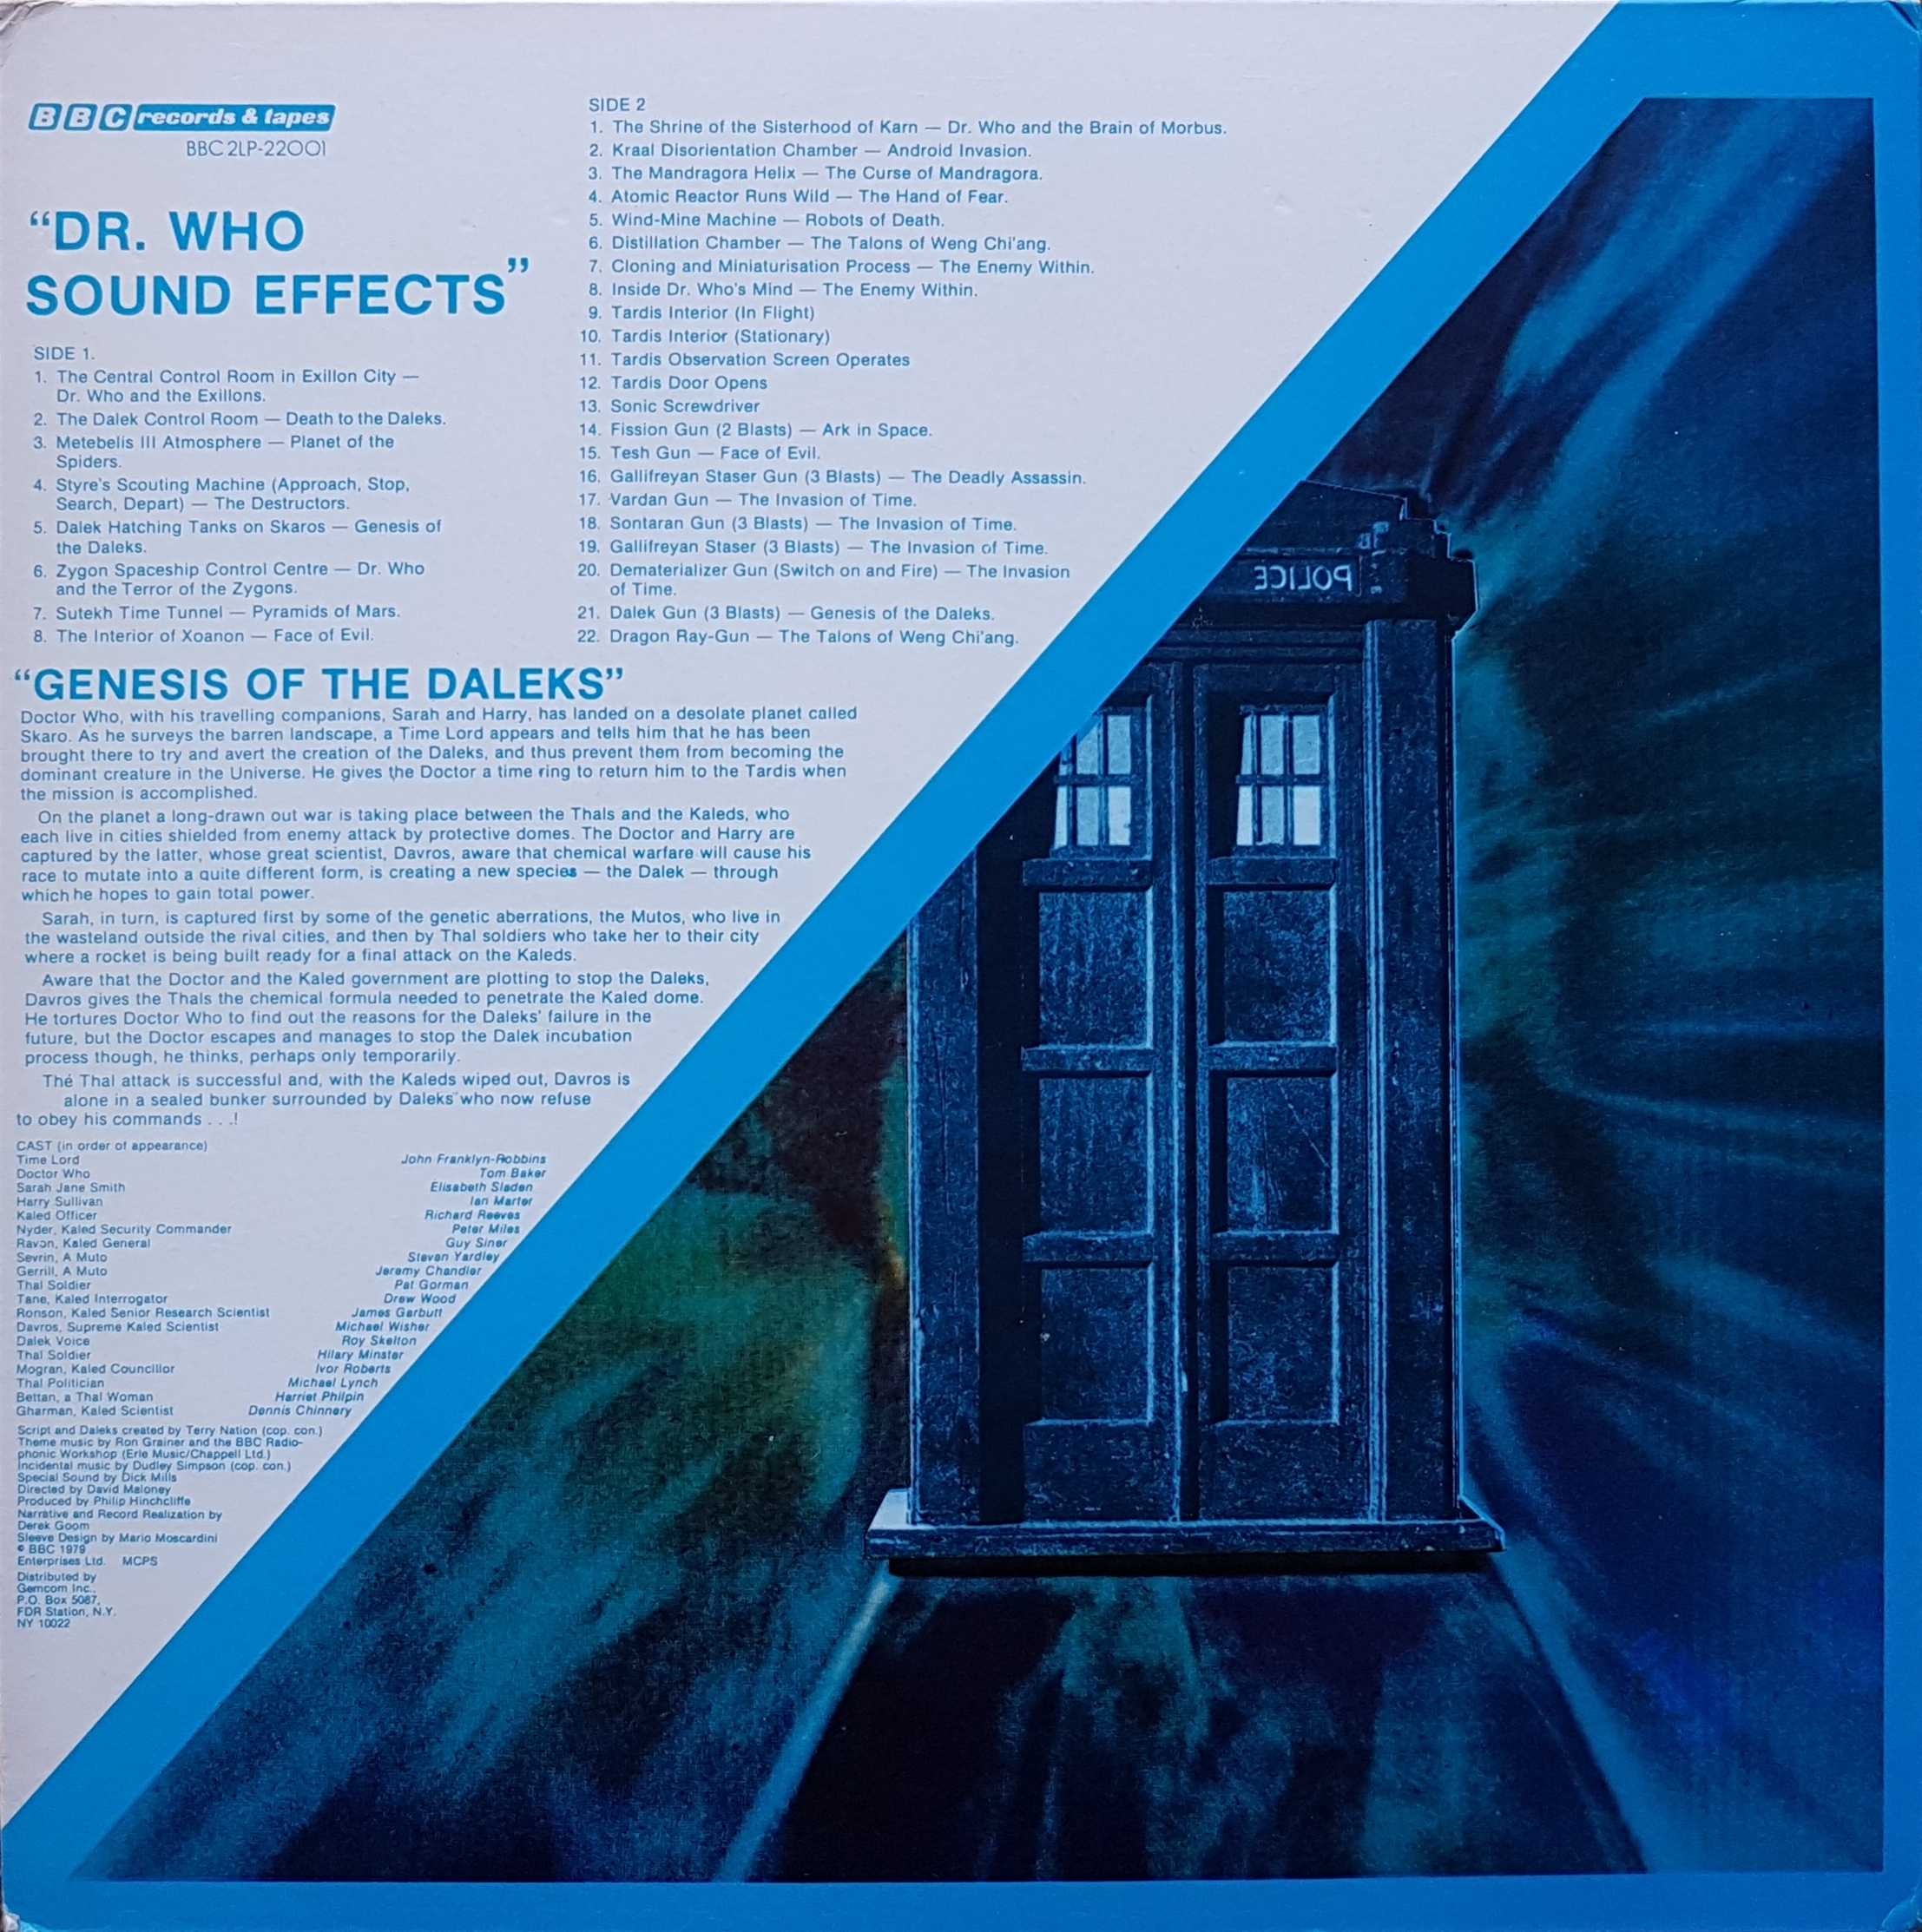 Back cover of BBC2LP-22001